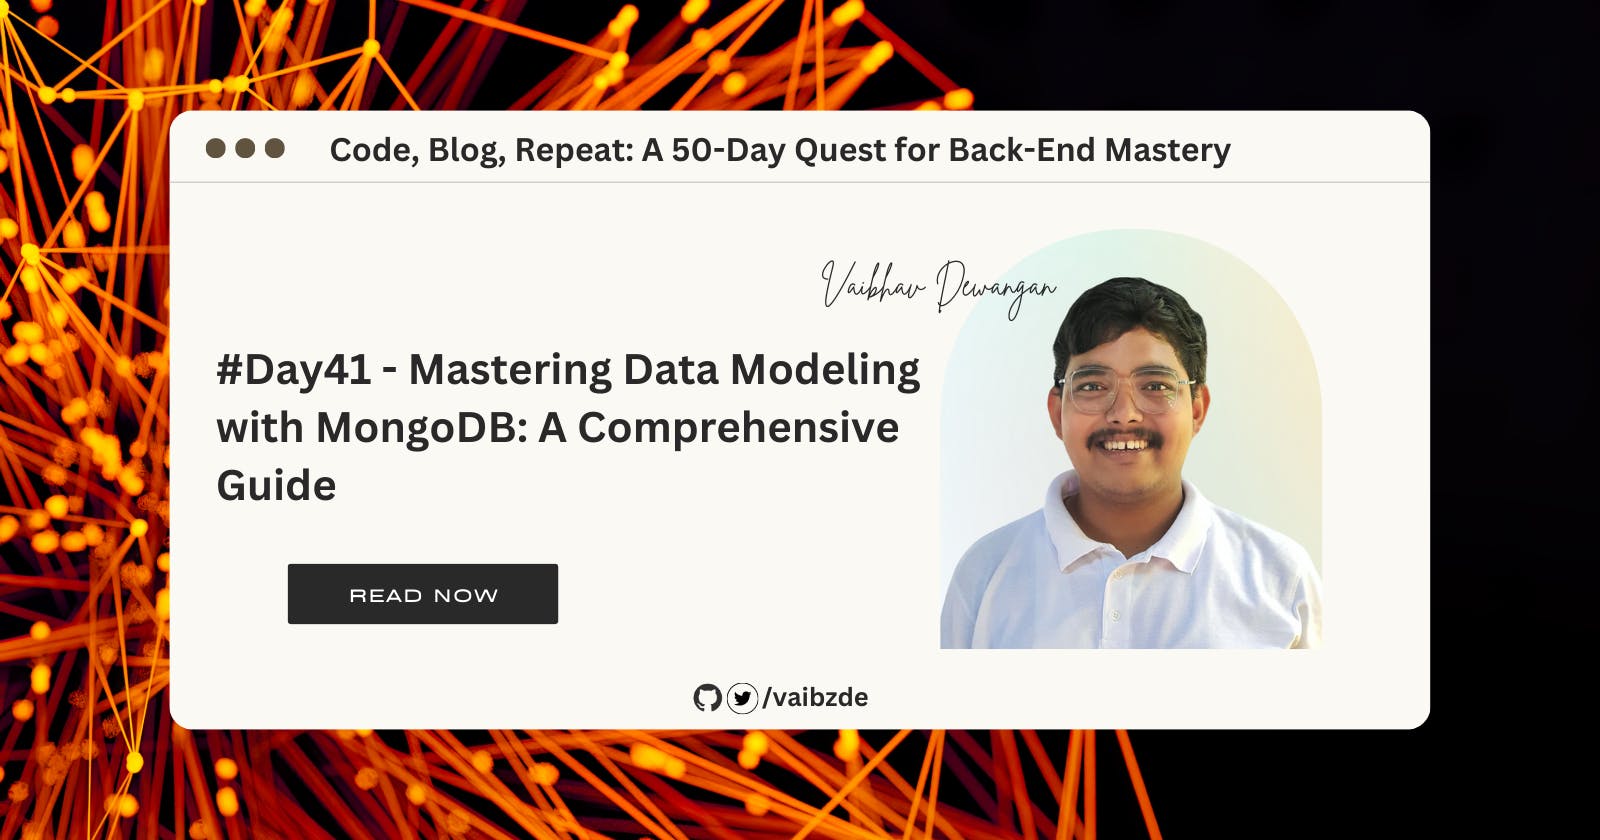 #Day41 - Mastering Data Modeling with MongoDB: A Comprehensive Guide